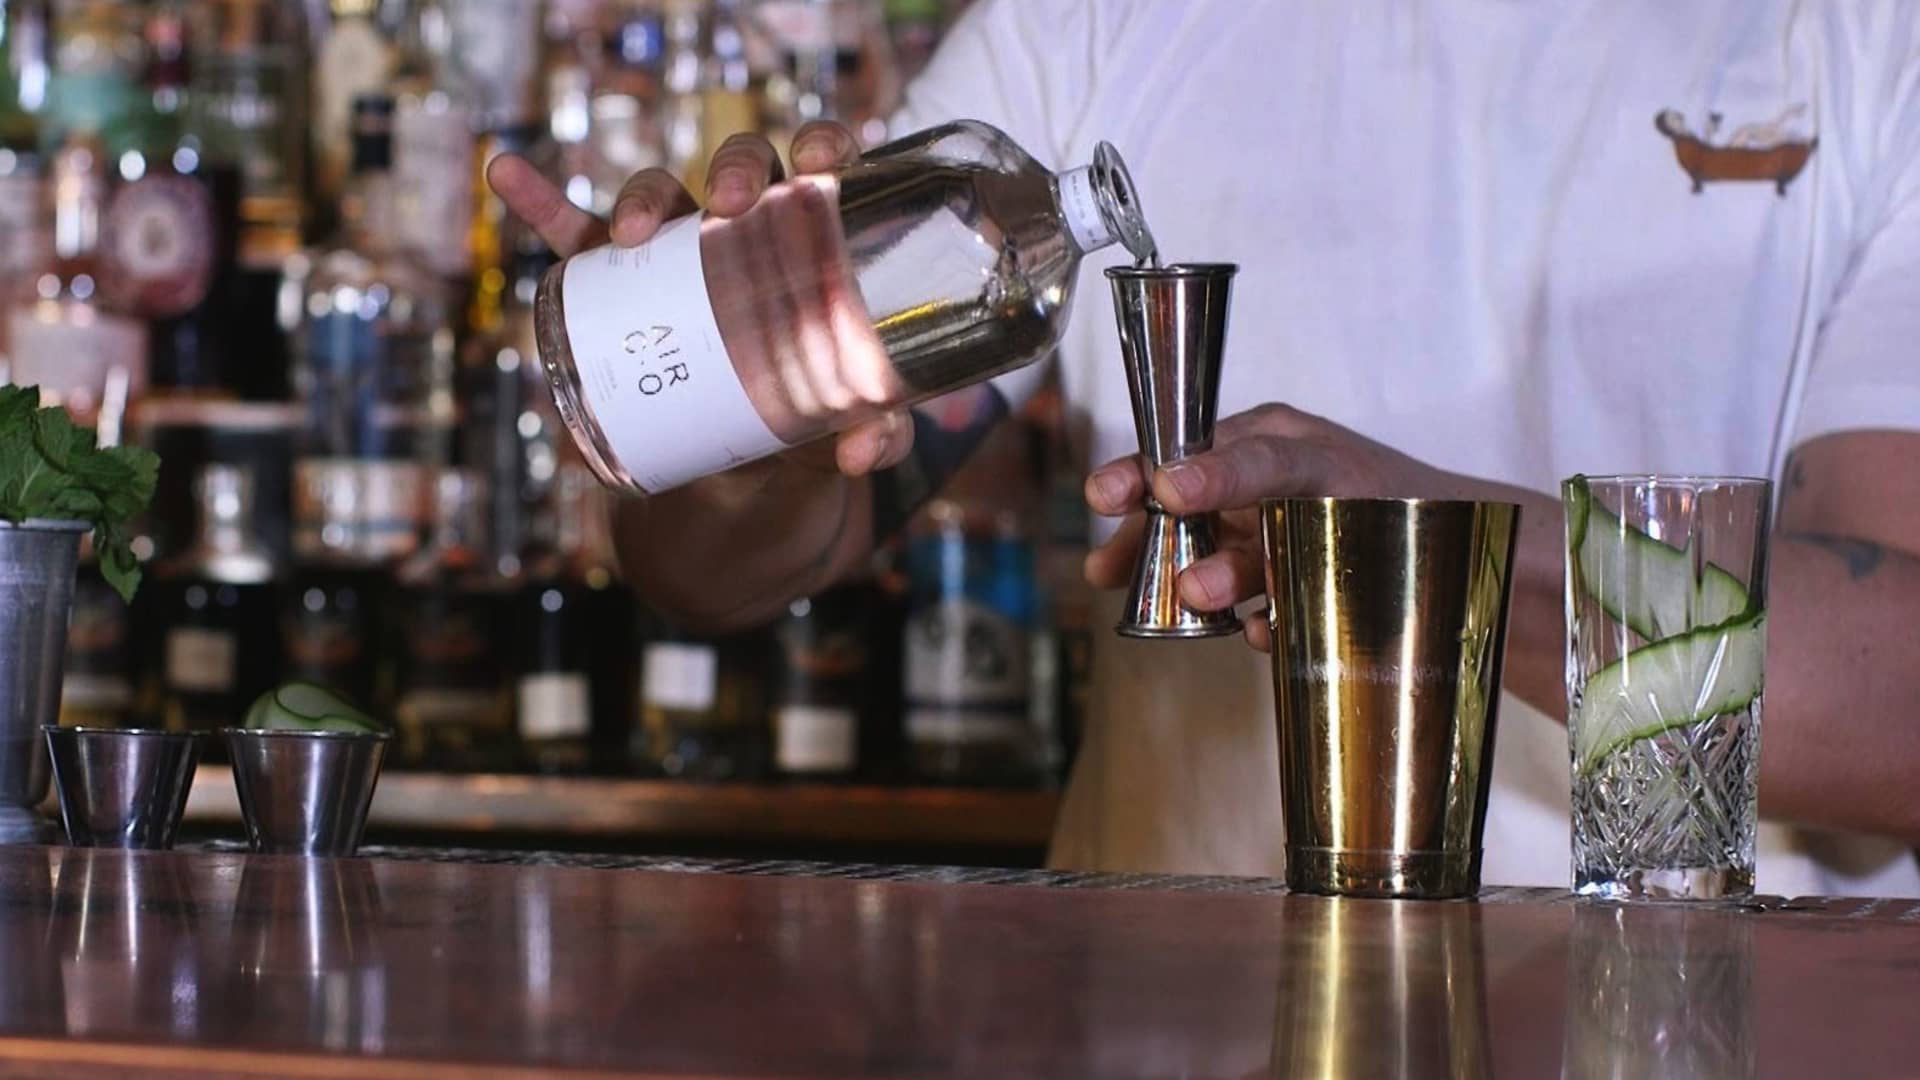 This start-up makes vodka out of CO2 emissions, and it’s backed by Toyota and JetBlue